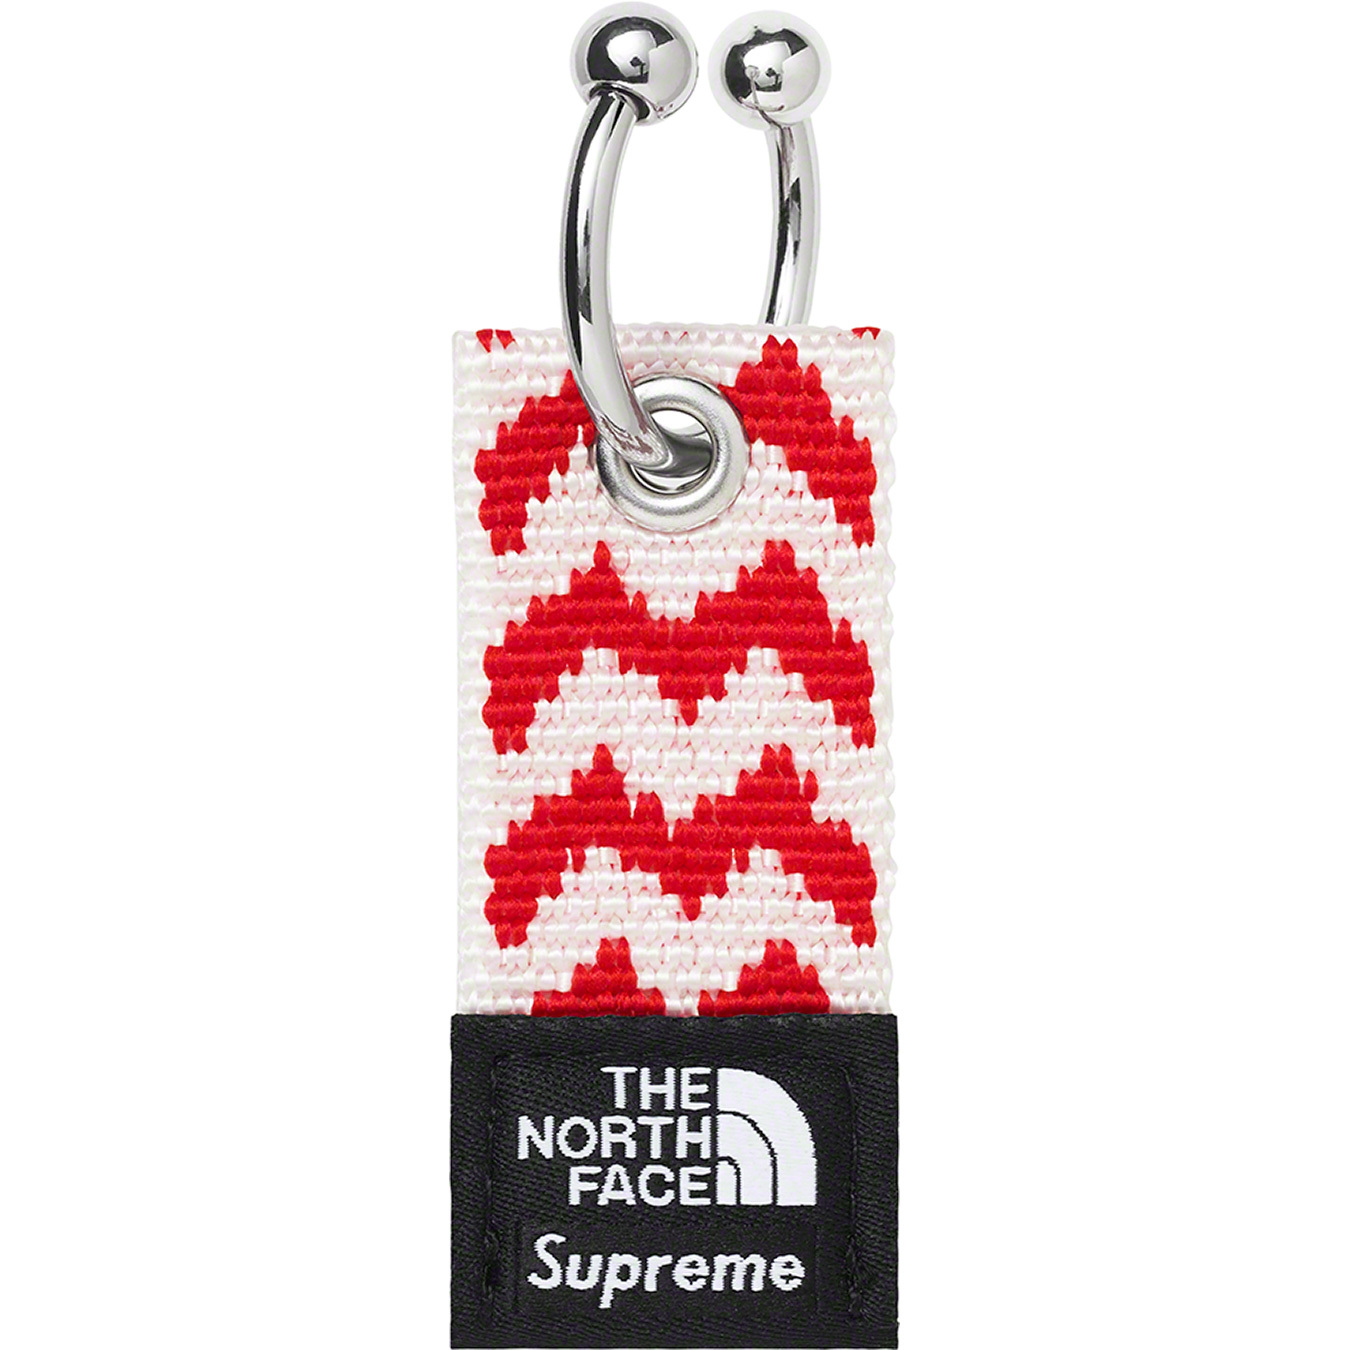 The North Face Woven Keychain - fall winter 2022 - Supreme